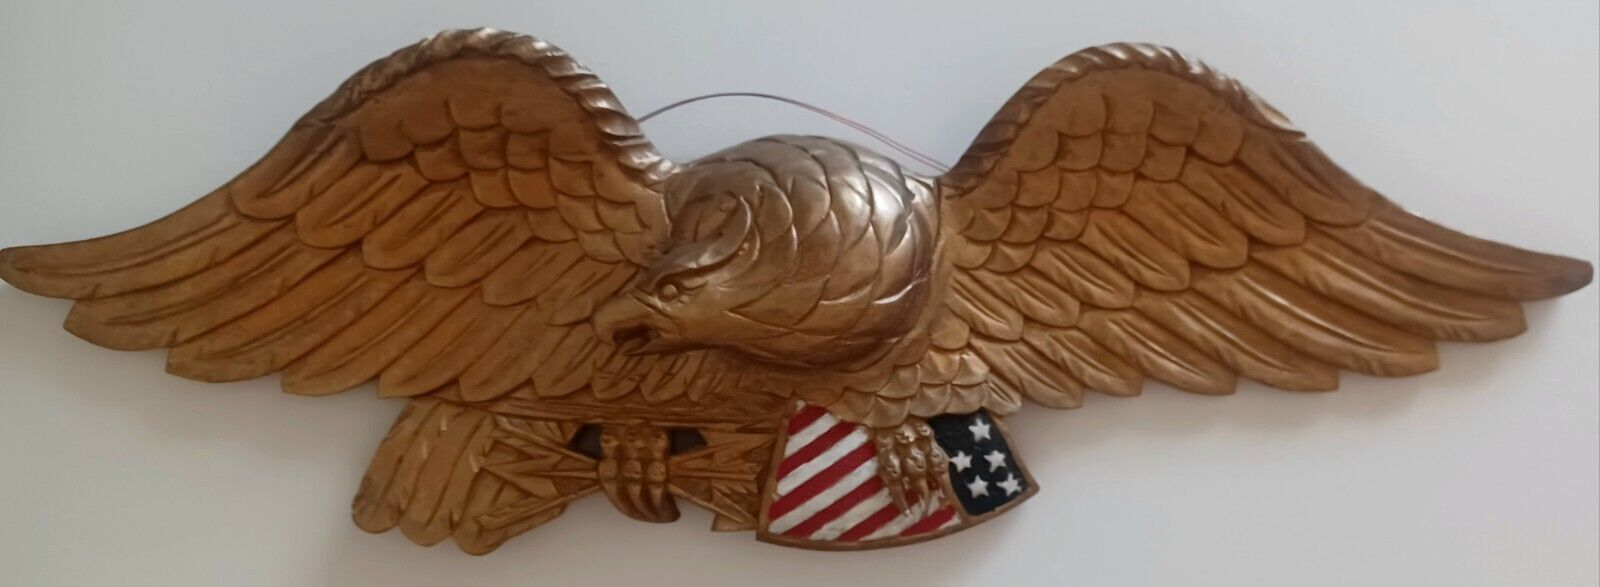 Vtg Carved, Gilded, and Painted Wooden Federal Eagle Wall Plaque Bellamy Style 